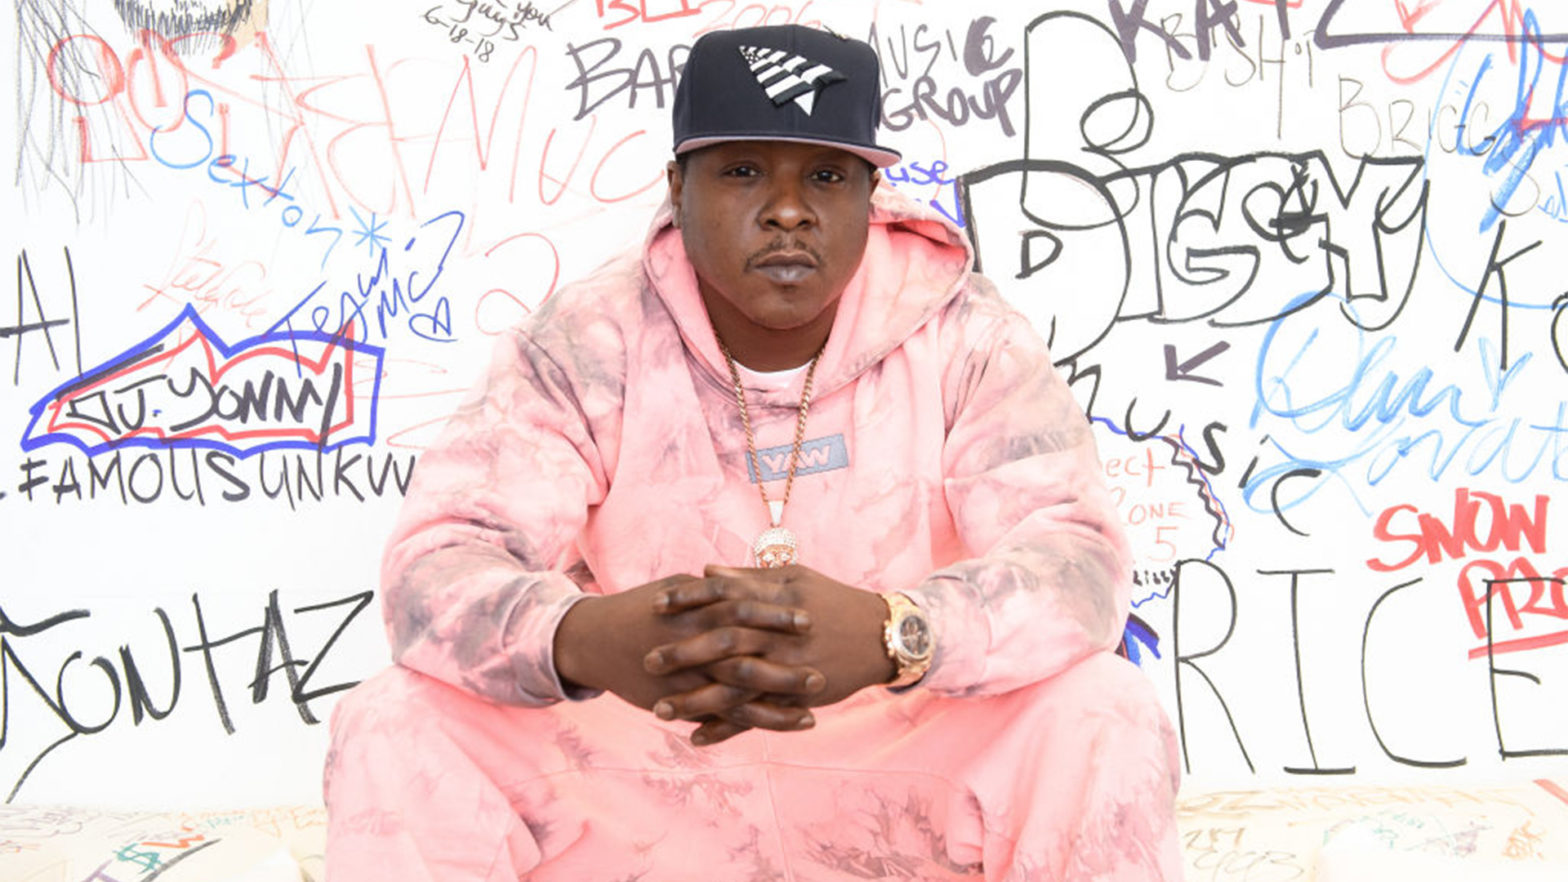 Jadakiss Keeps 40 Years Of Legacy Going By Launching A Coffee Line With His Father And Son